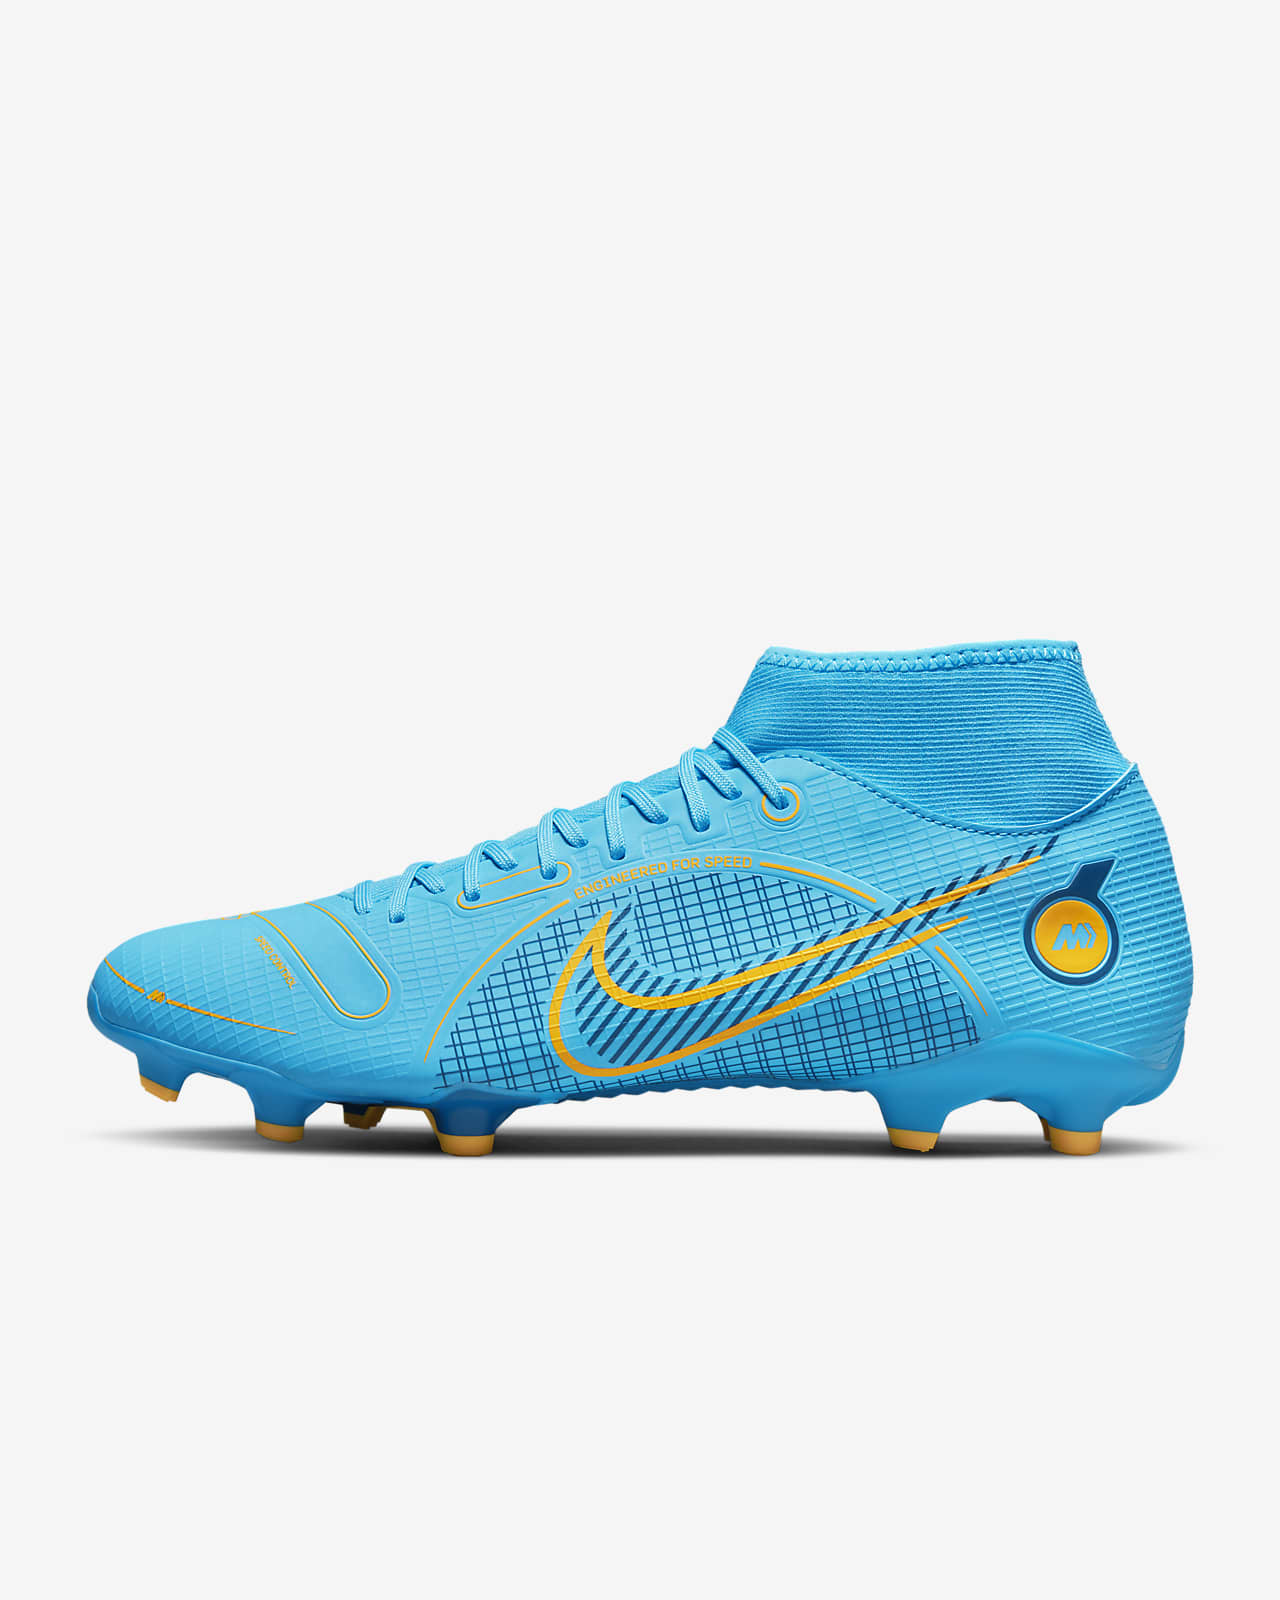 Nike Mercurial Superfly 8 Academy MG Multi-Ground Football Boots